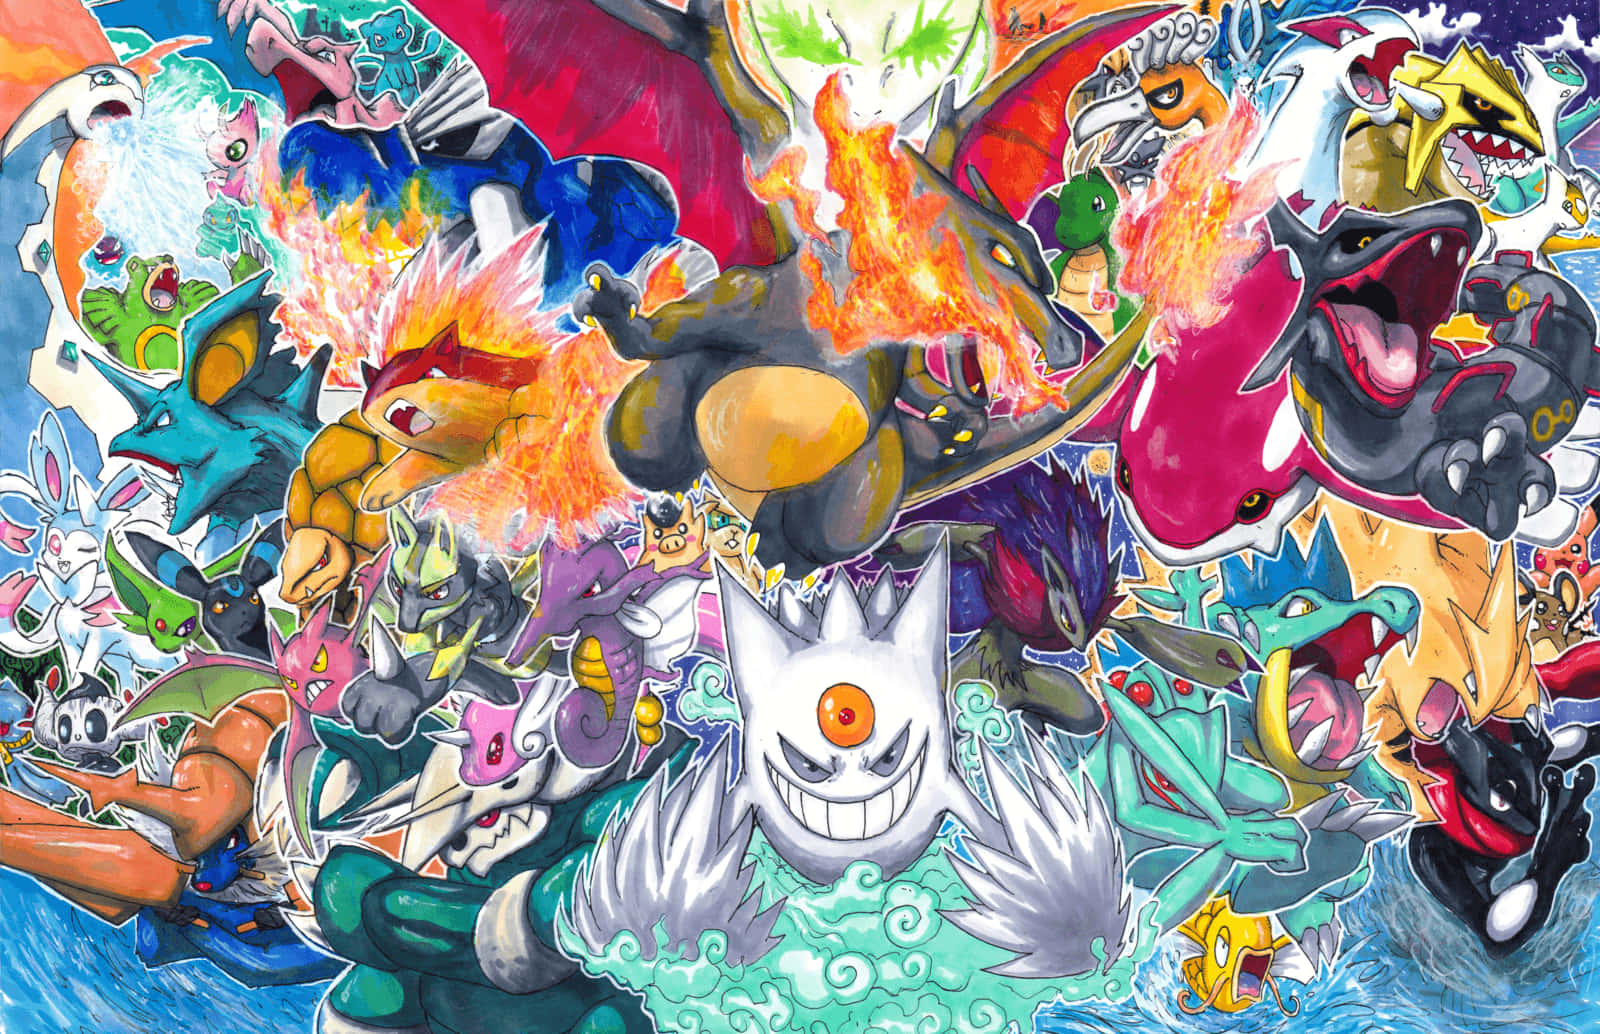 Trick or treat! Get ready for Halloween Pokemon style! Wallpaper